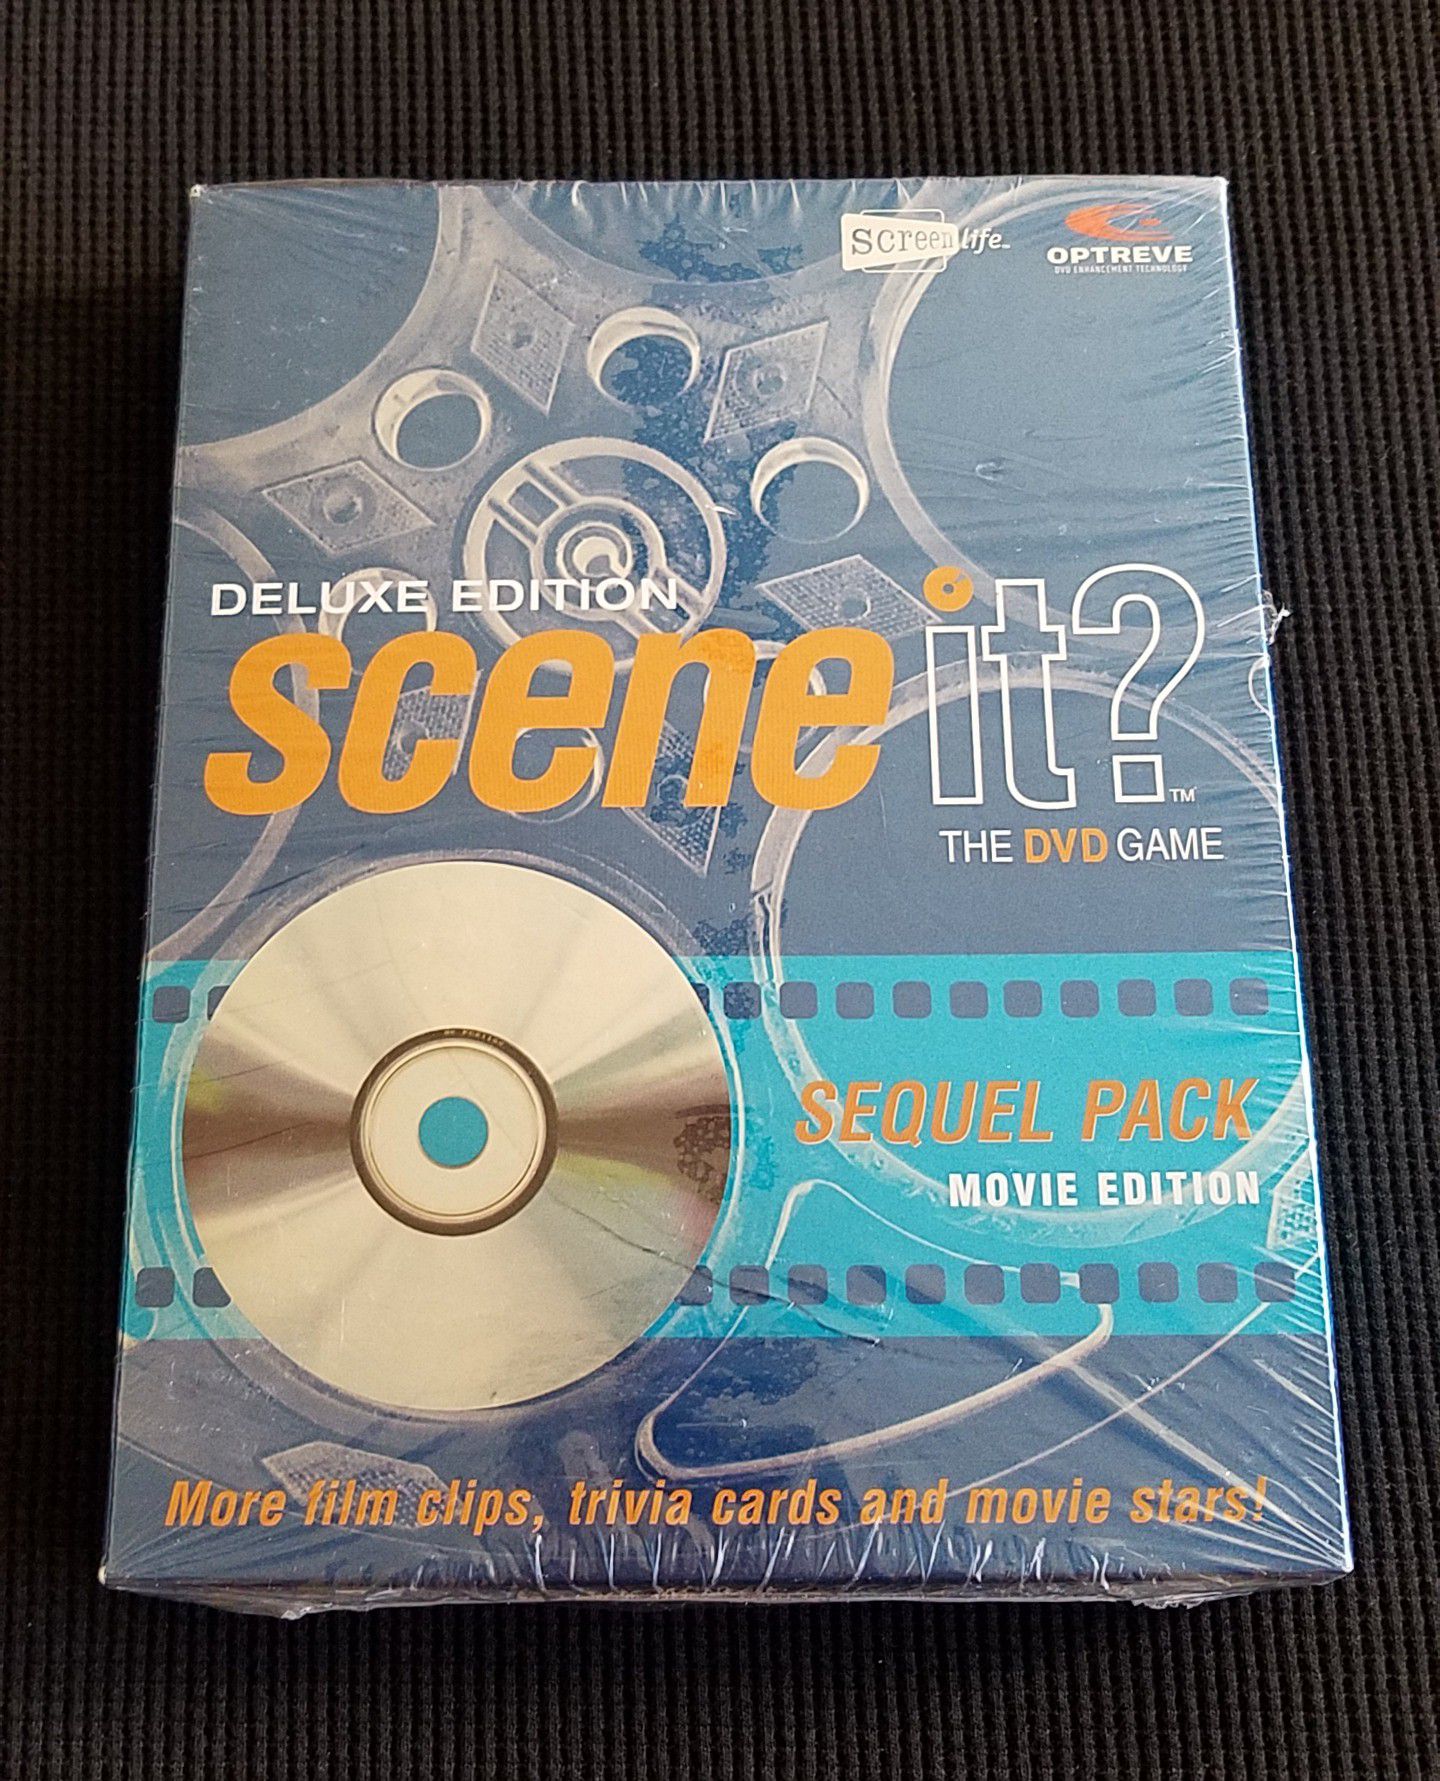 NEW! Deluxe Edition Scene It ? The DVD Game Sequel Pack MOVIE EDITION